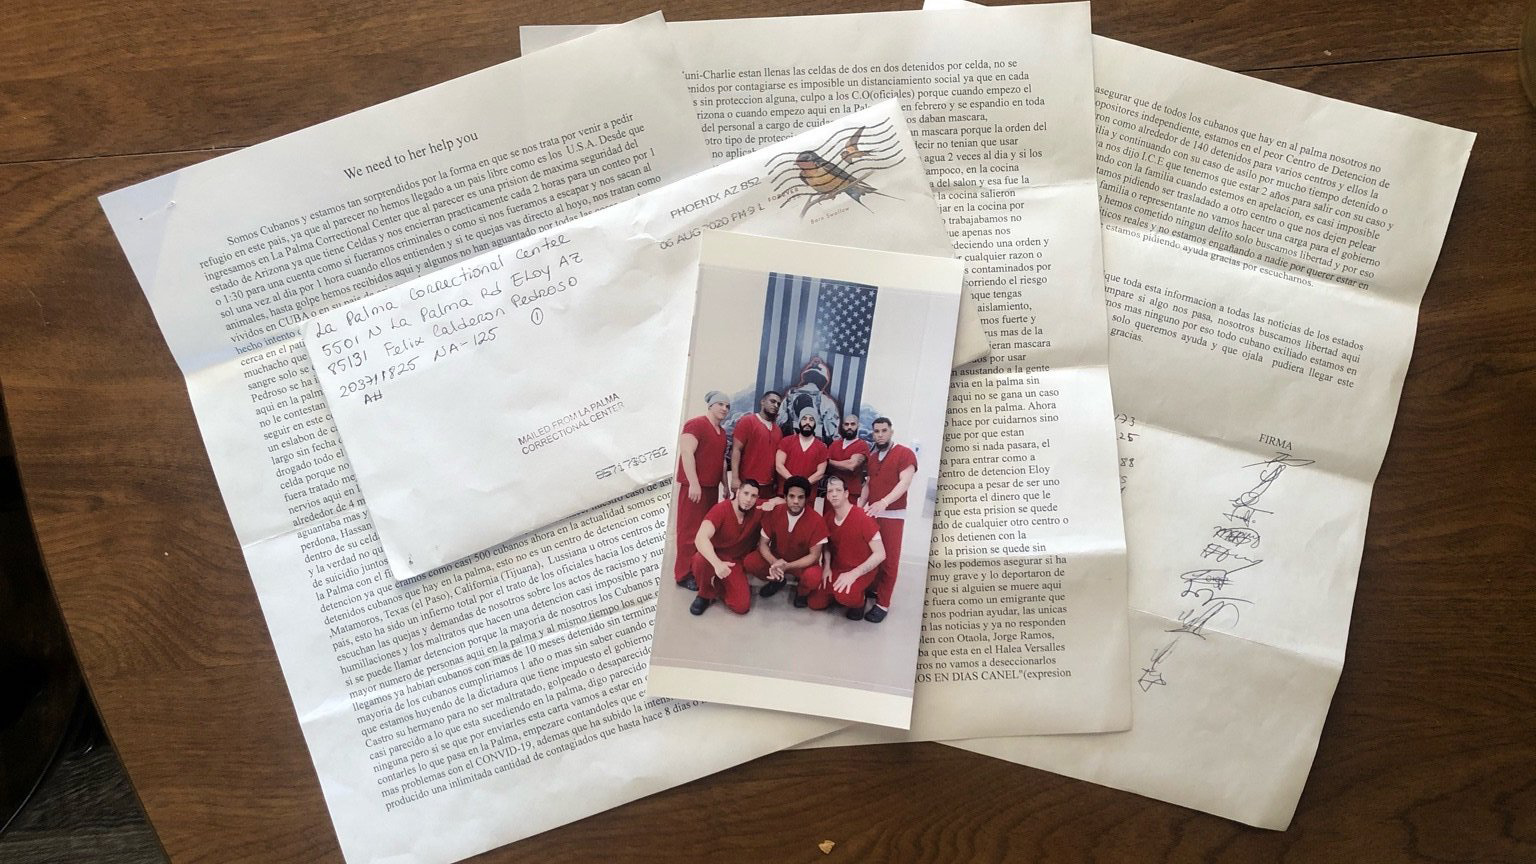 An image of the group of Cuban asylum seekers and the letter they sent from the La Palma Correctional Center in Eloy.